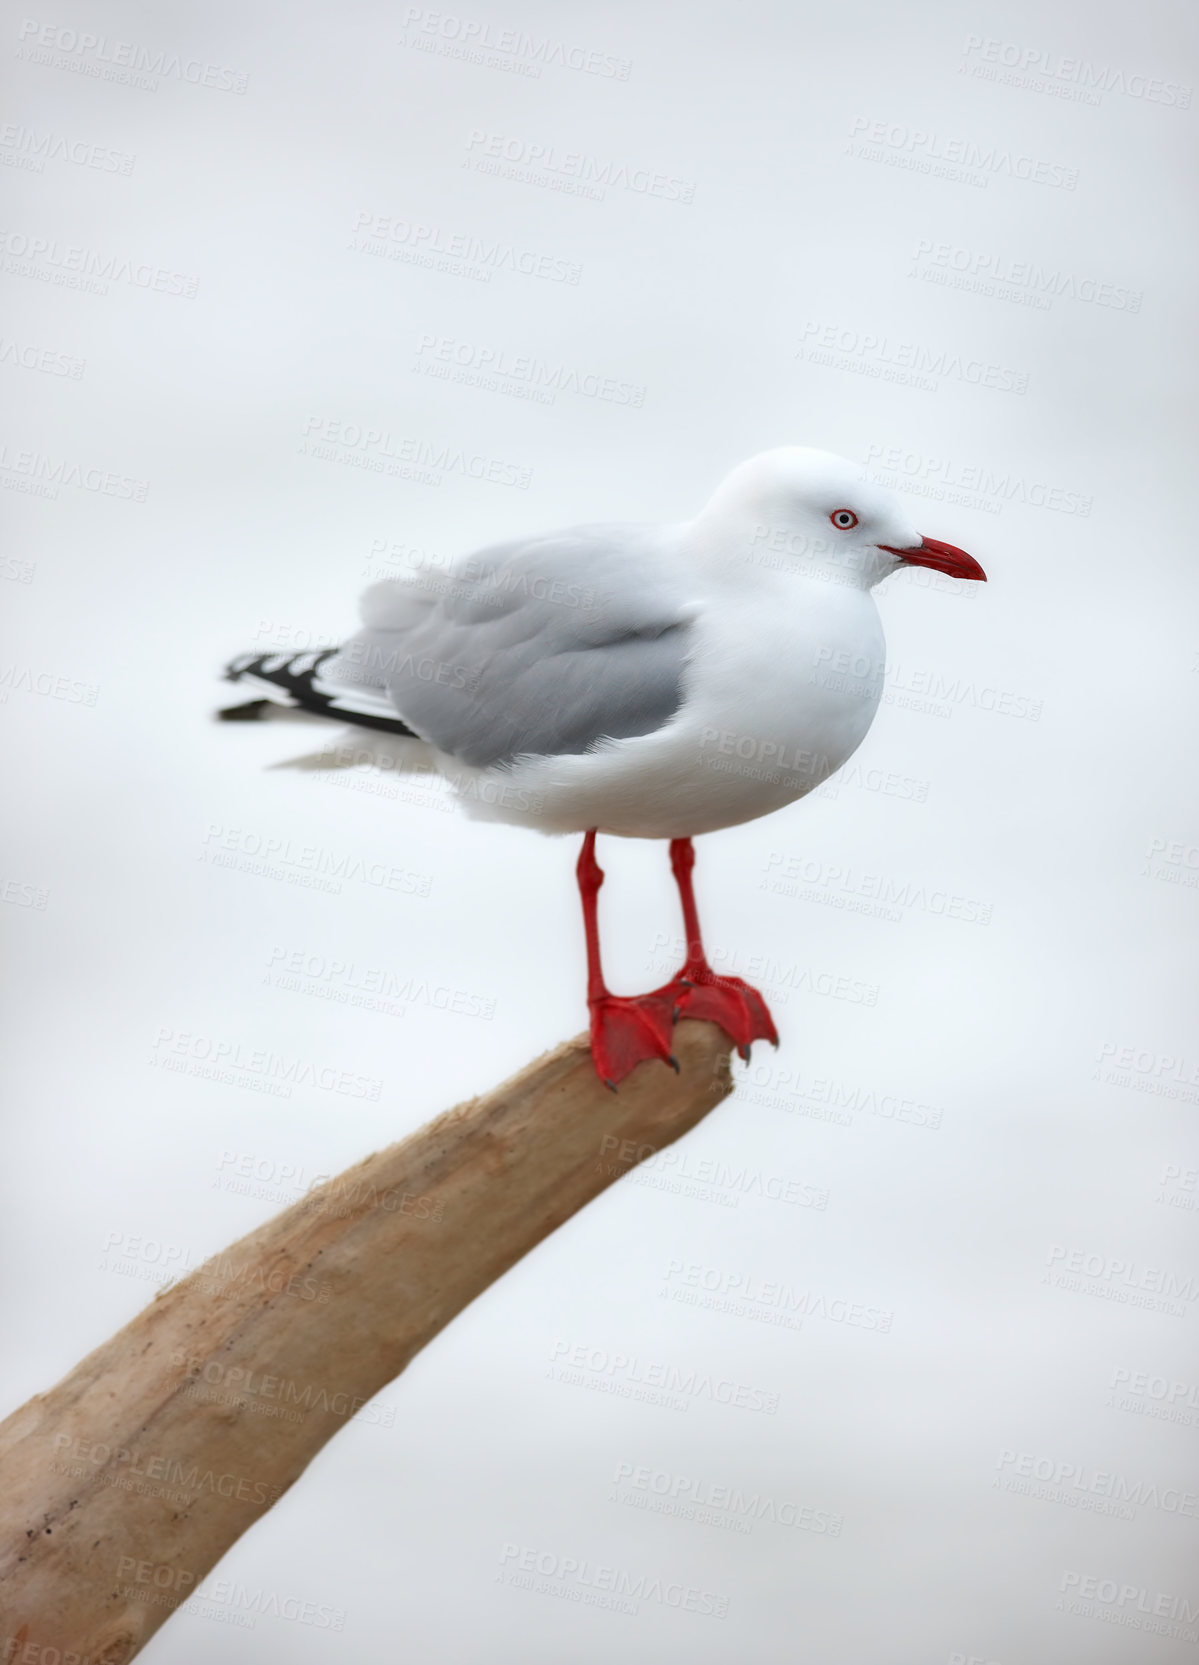 Buy stock photo A seagull in its natural habitat by the ocean. Wildlife sitting on a stump in nature against a blurred grey background outside. One cute clean marine bird on driftwood at the beach with copy space 